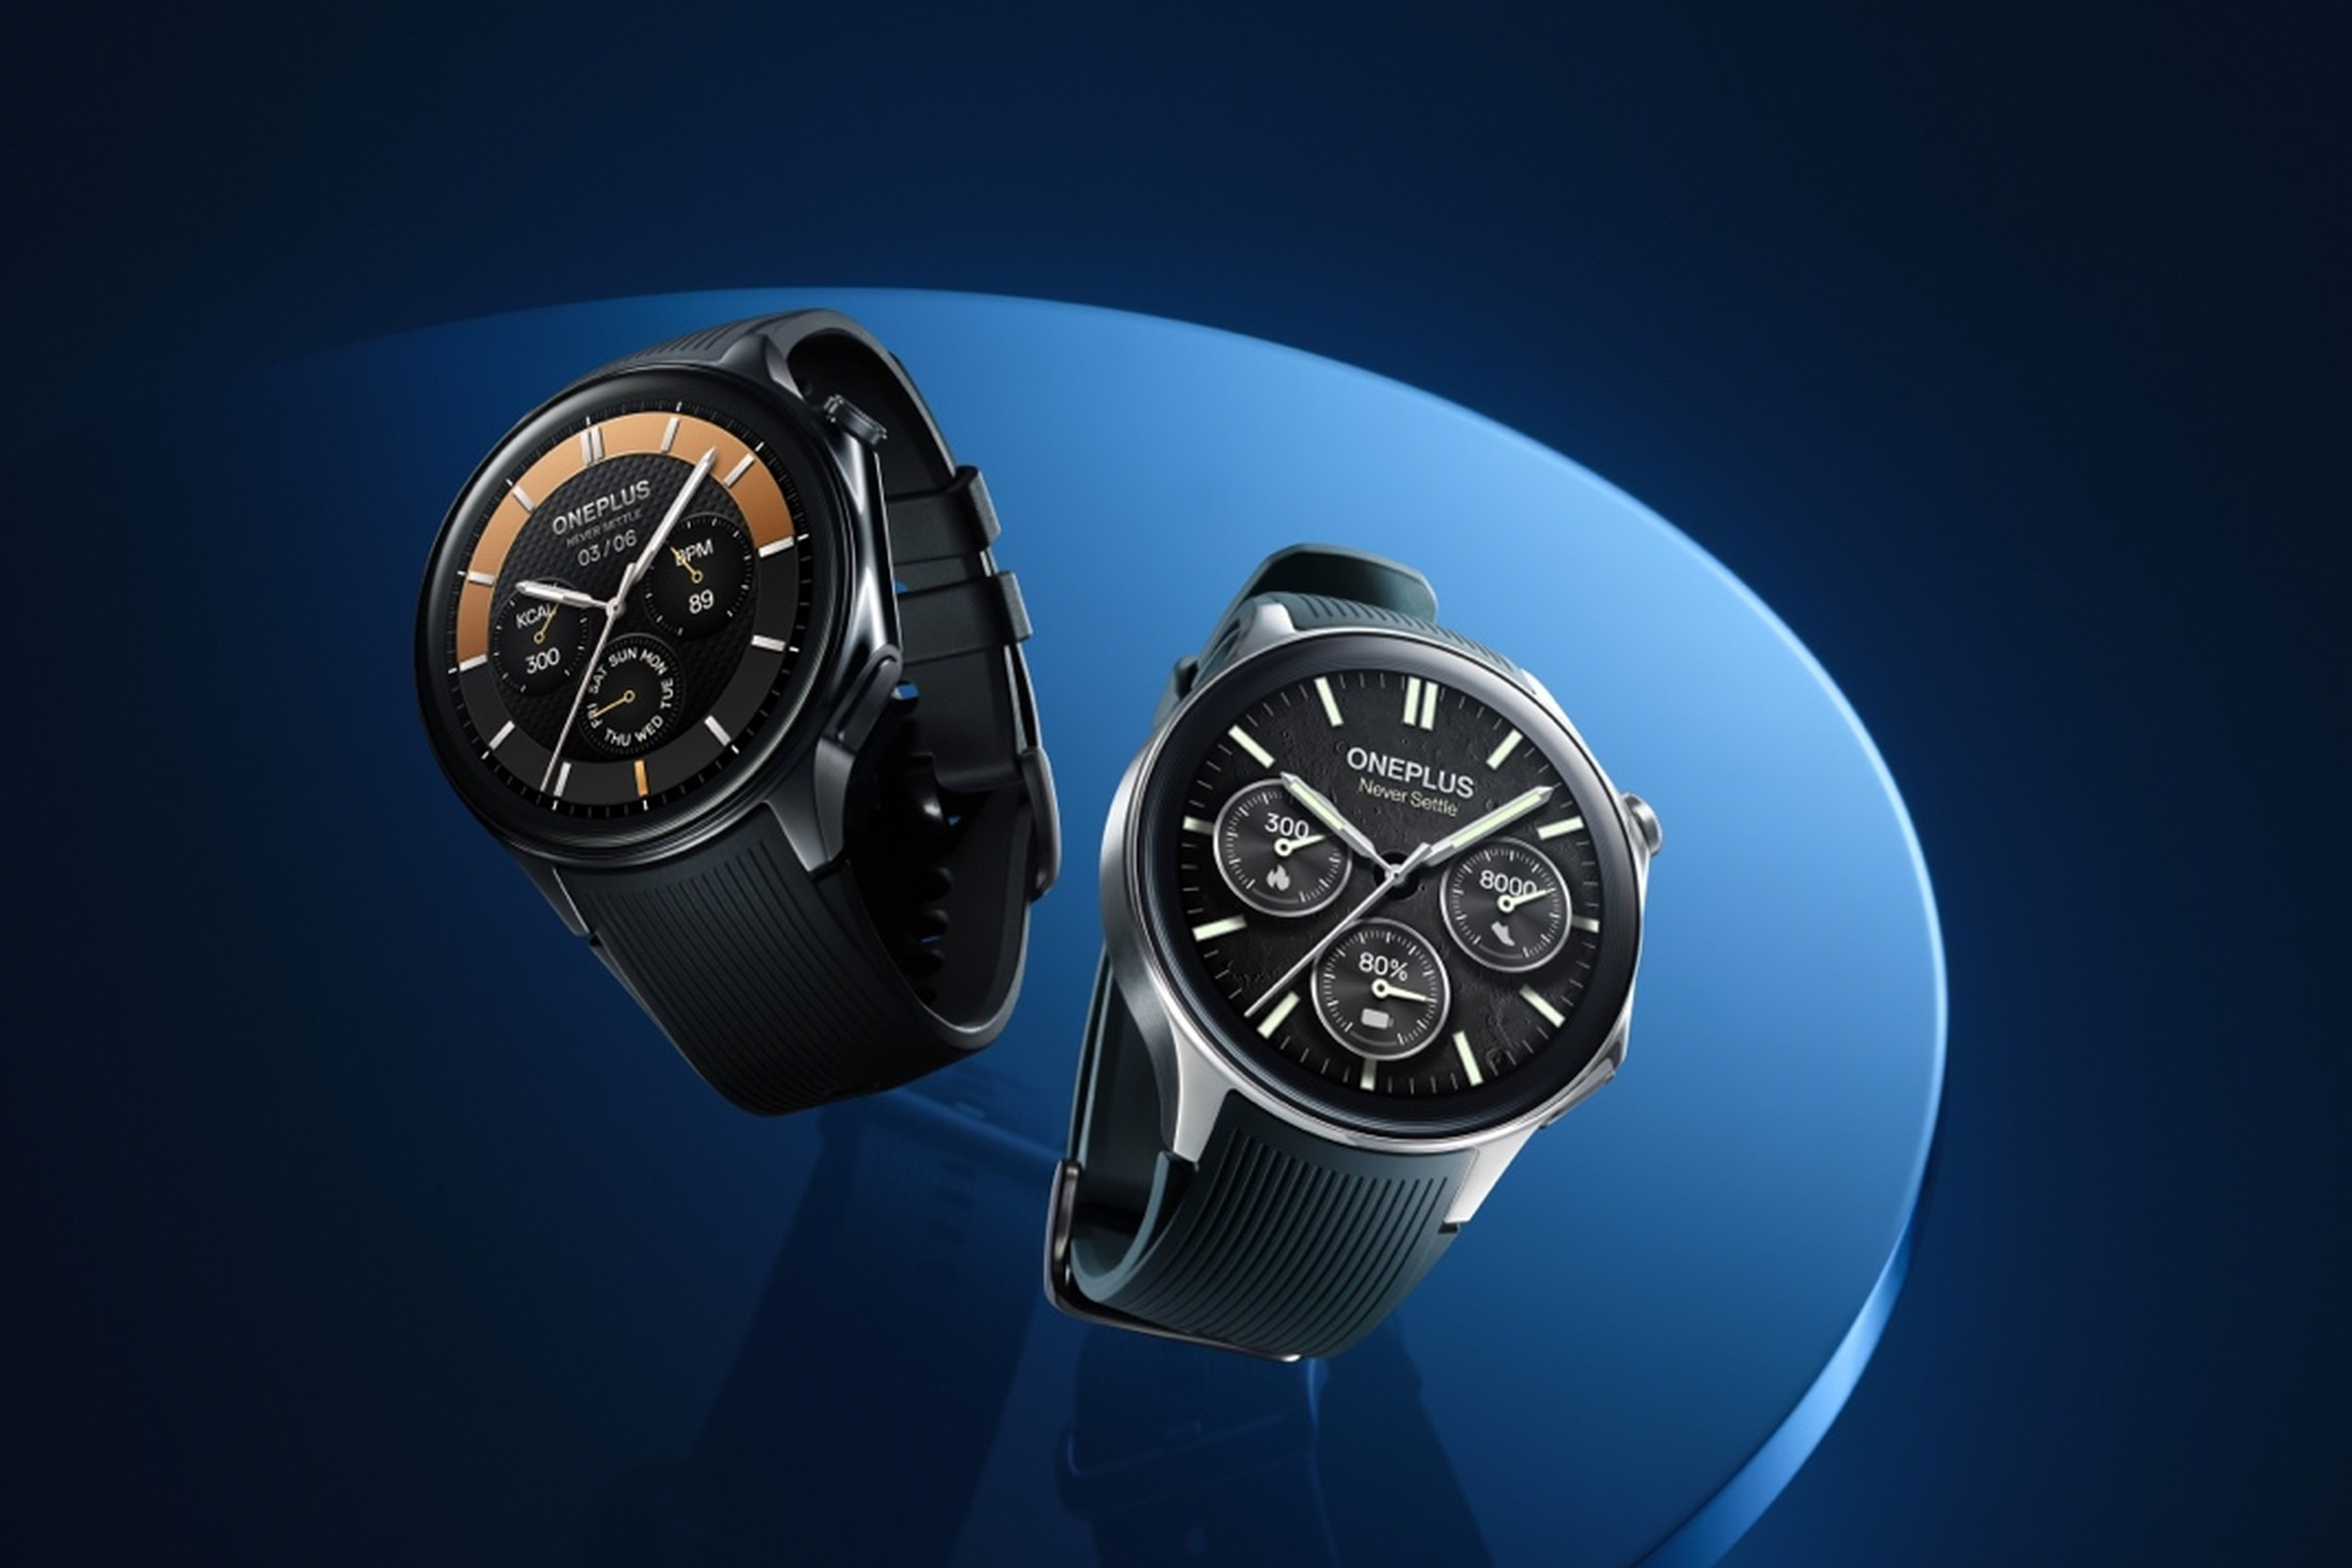 A promotional image showing the black and silver OnePlus Watch 2 against a rendered blue disc on a black background.